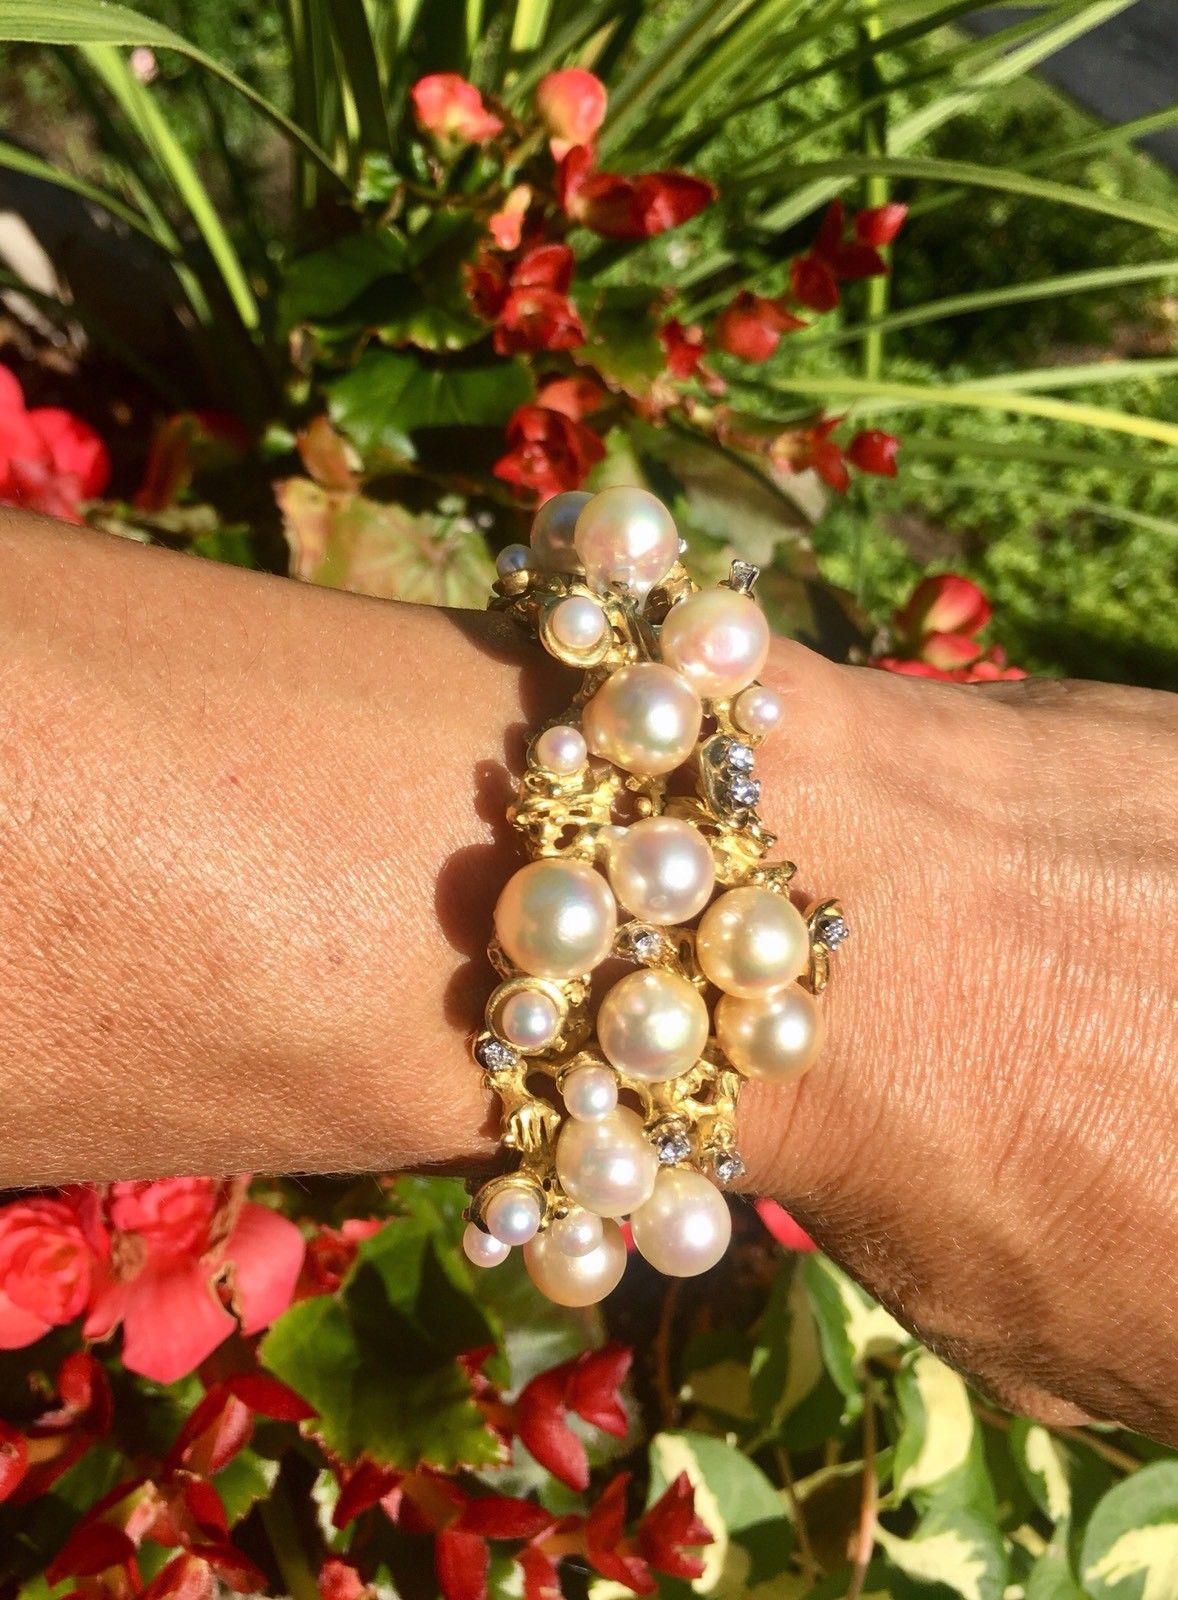 Mid Century Peter Lindeman 18 Karat Gold Pearl Diamond Cuff Bangle Bracelet In Excellent Condition For Sale In Shaker Heights, OH